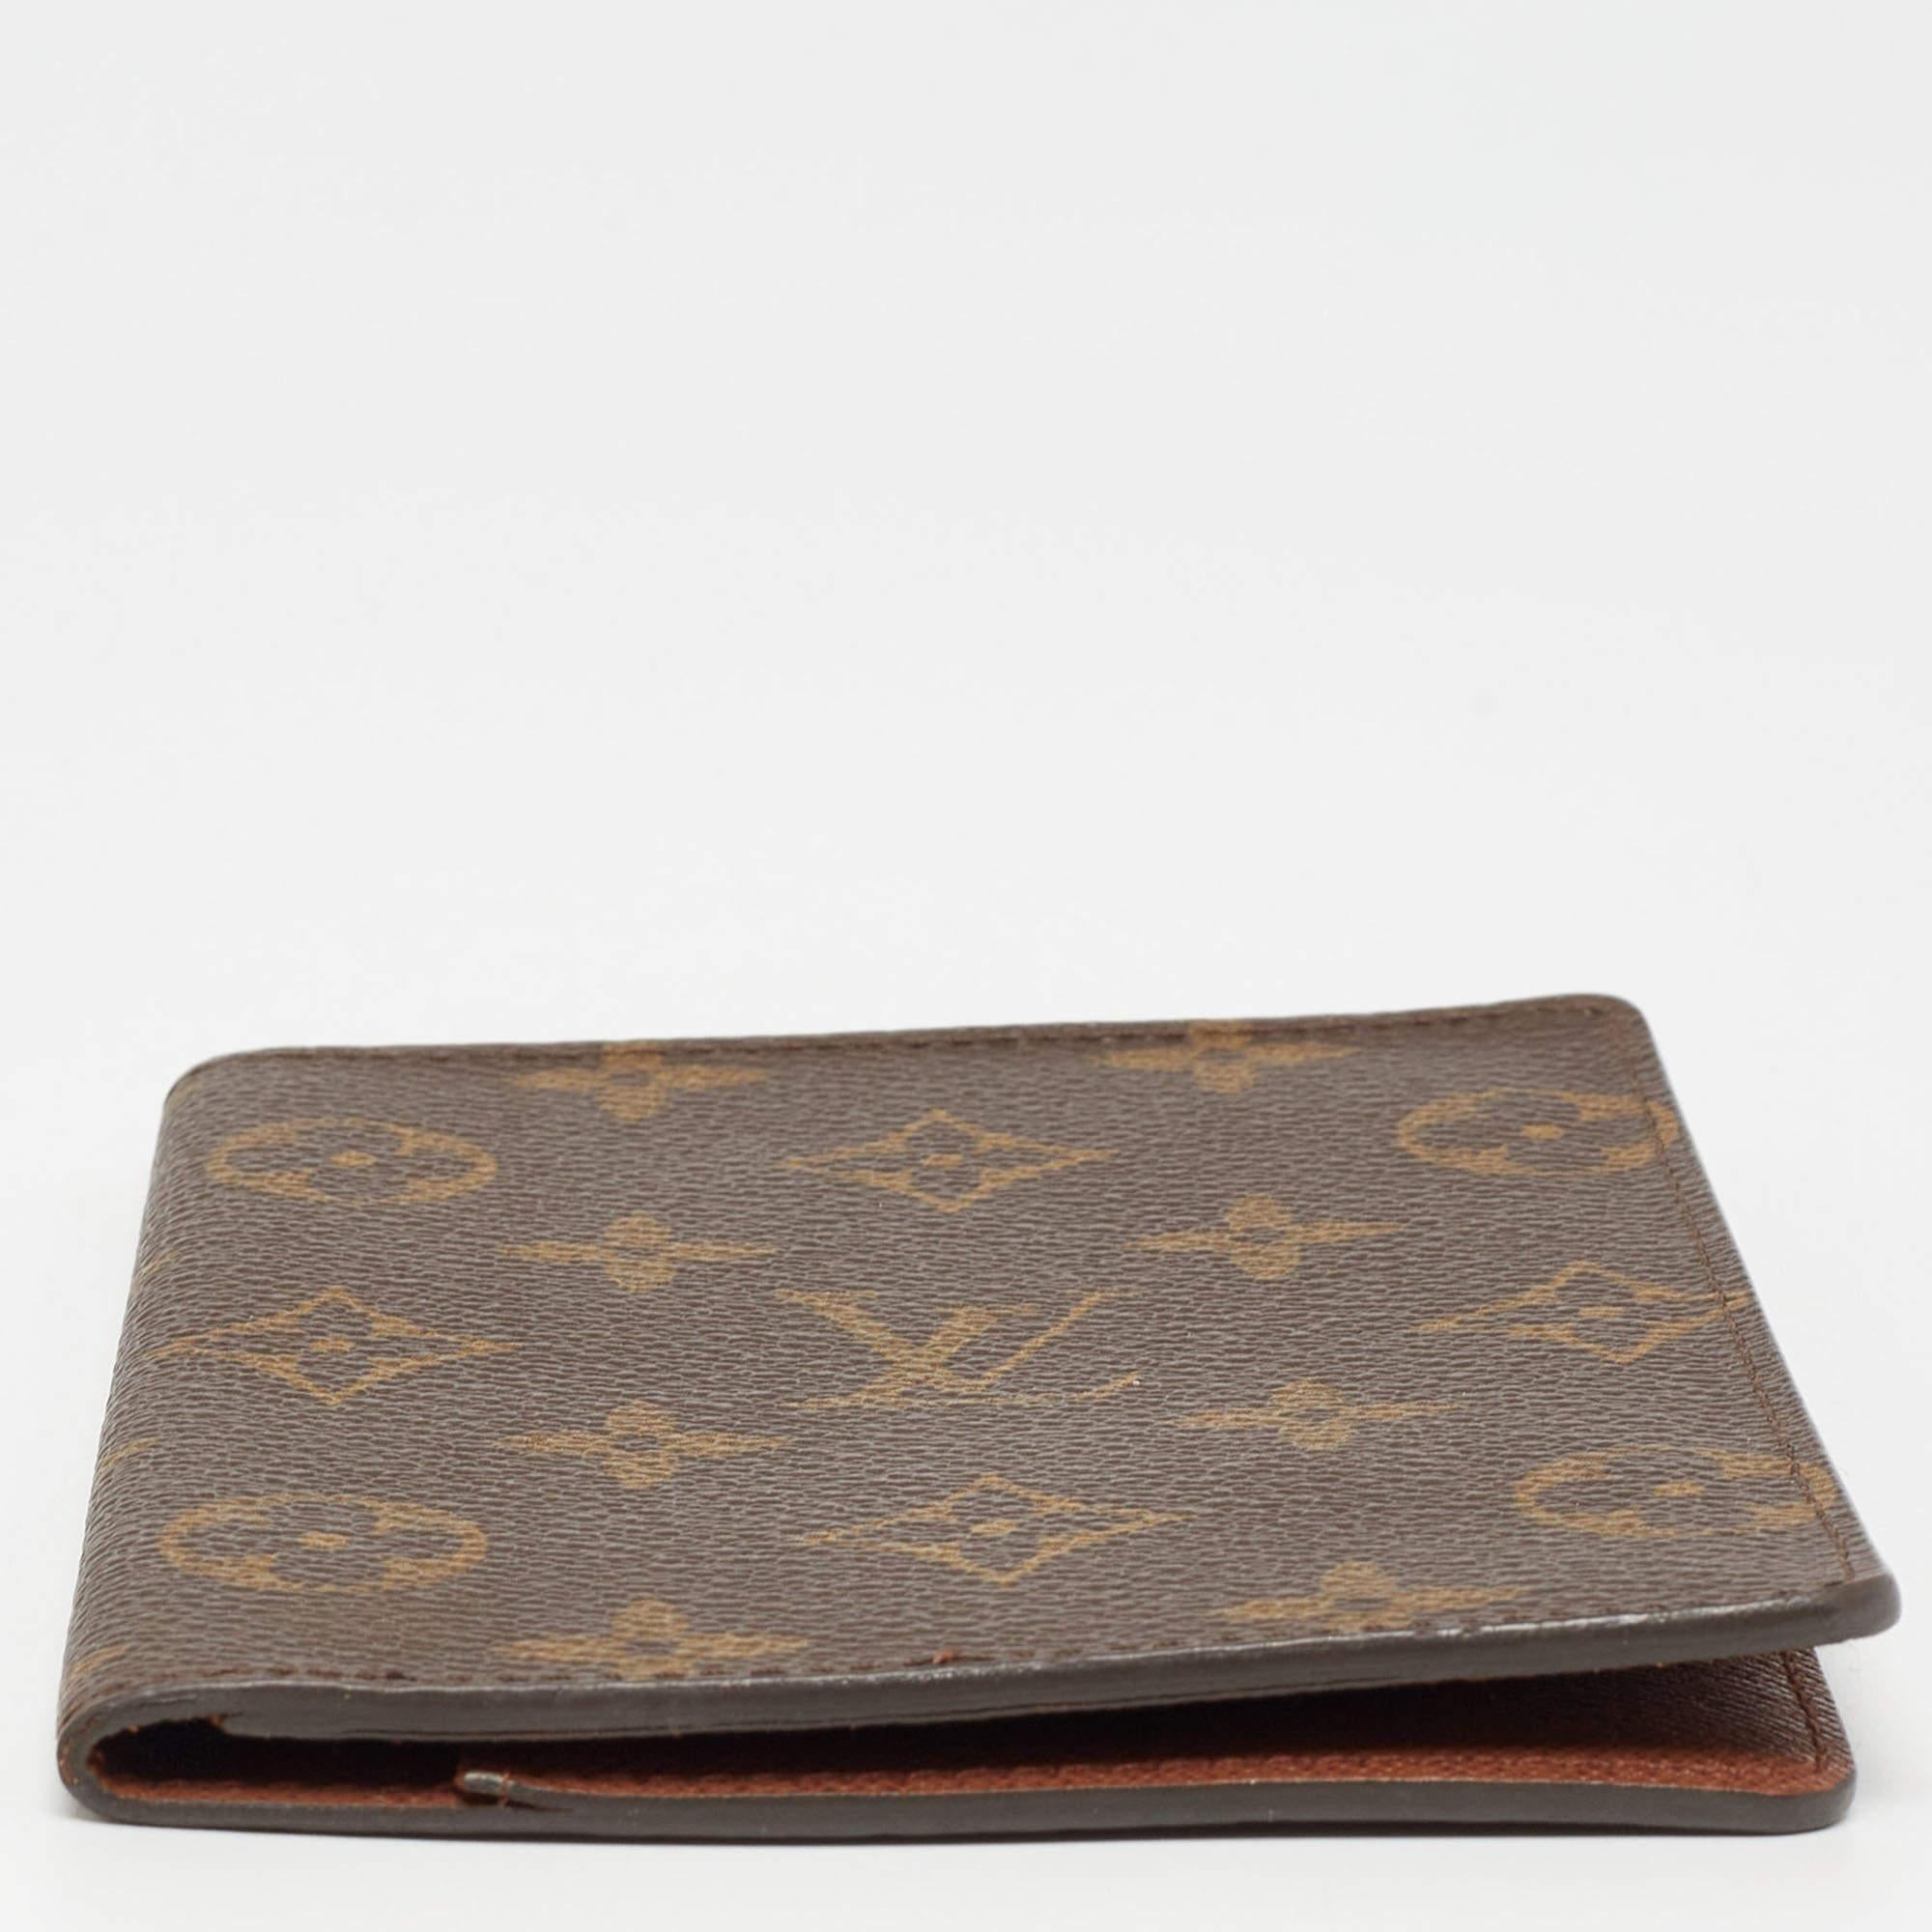 Keep your passport and credit cards organized while you travel, in this chic passport cover by Louis Vuitton. Its exterior is made from coated canvas. It opens to reveal multiple slots for ease of storage.

